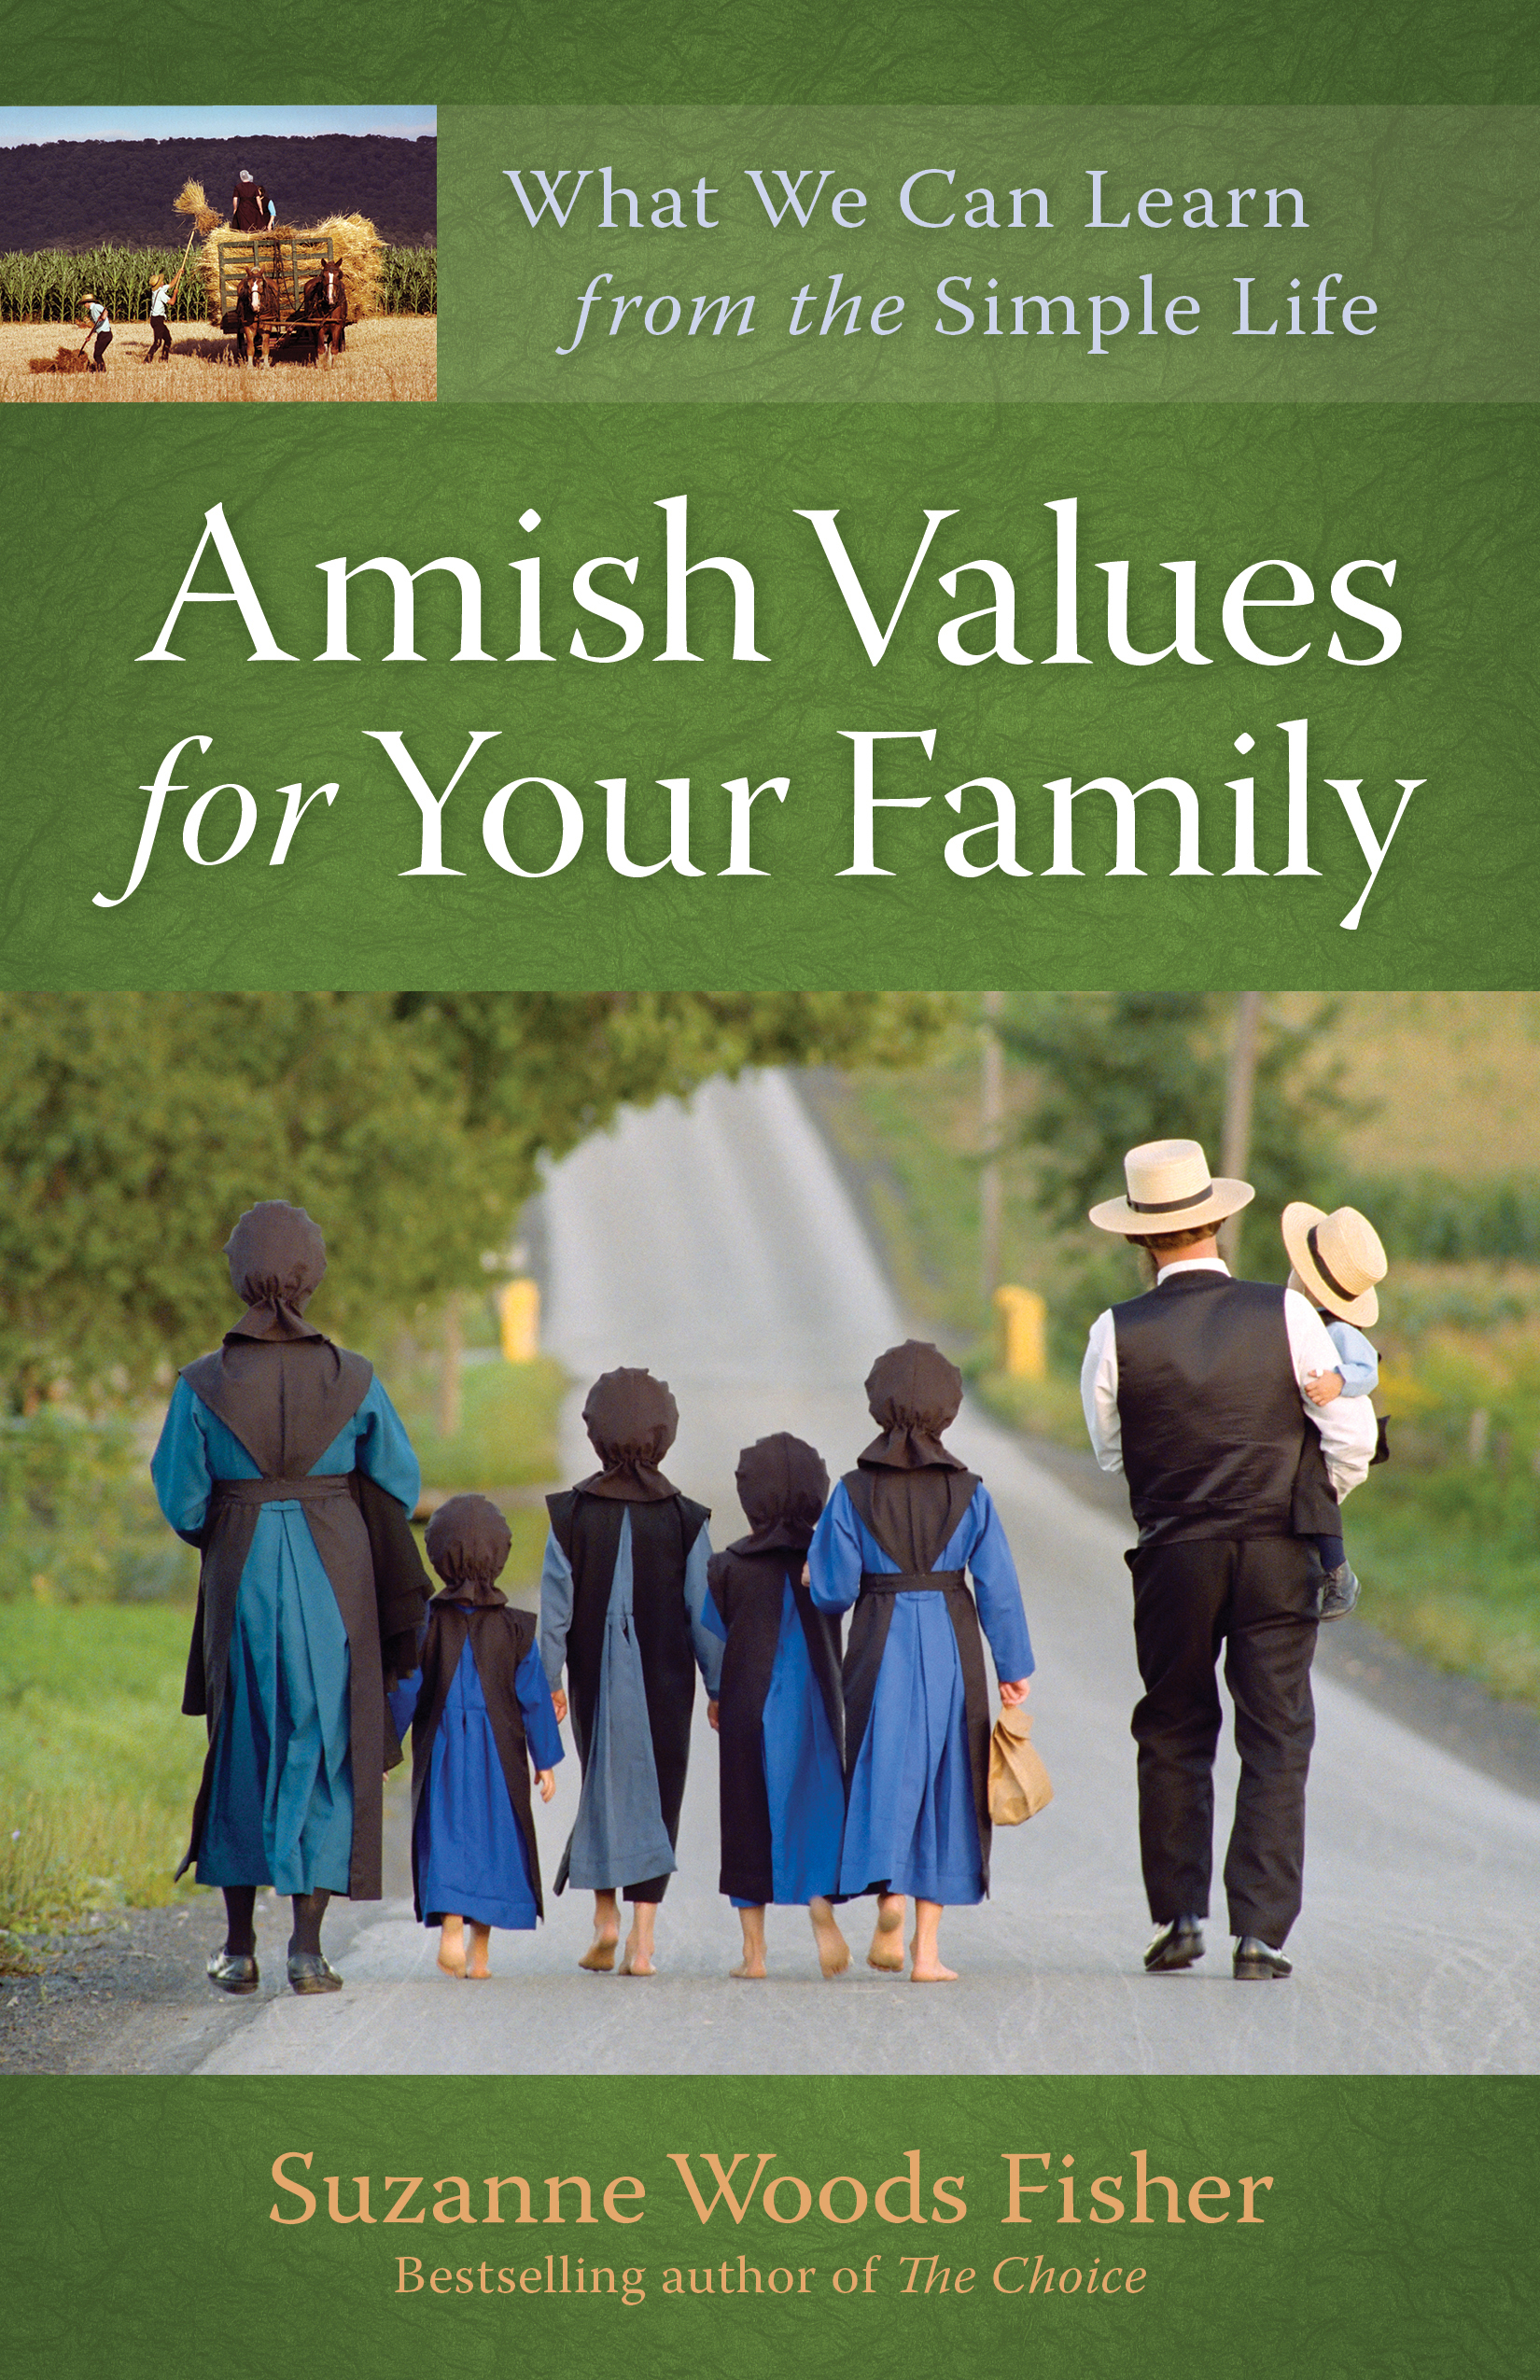 Image de couverture de Amish Values for Your Family [electronic resource] : What We Can Learn from the Simple Life